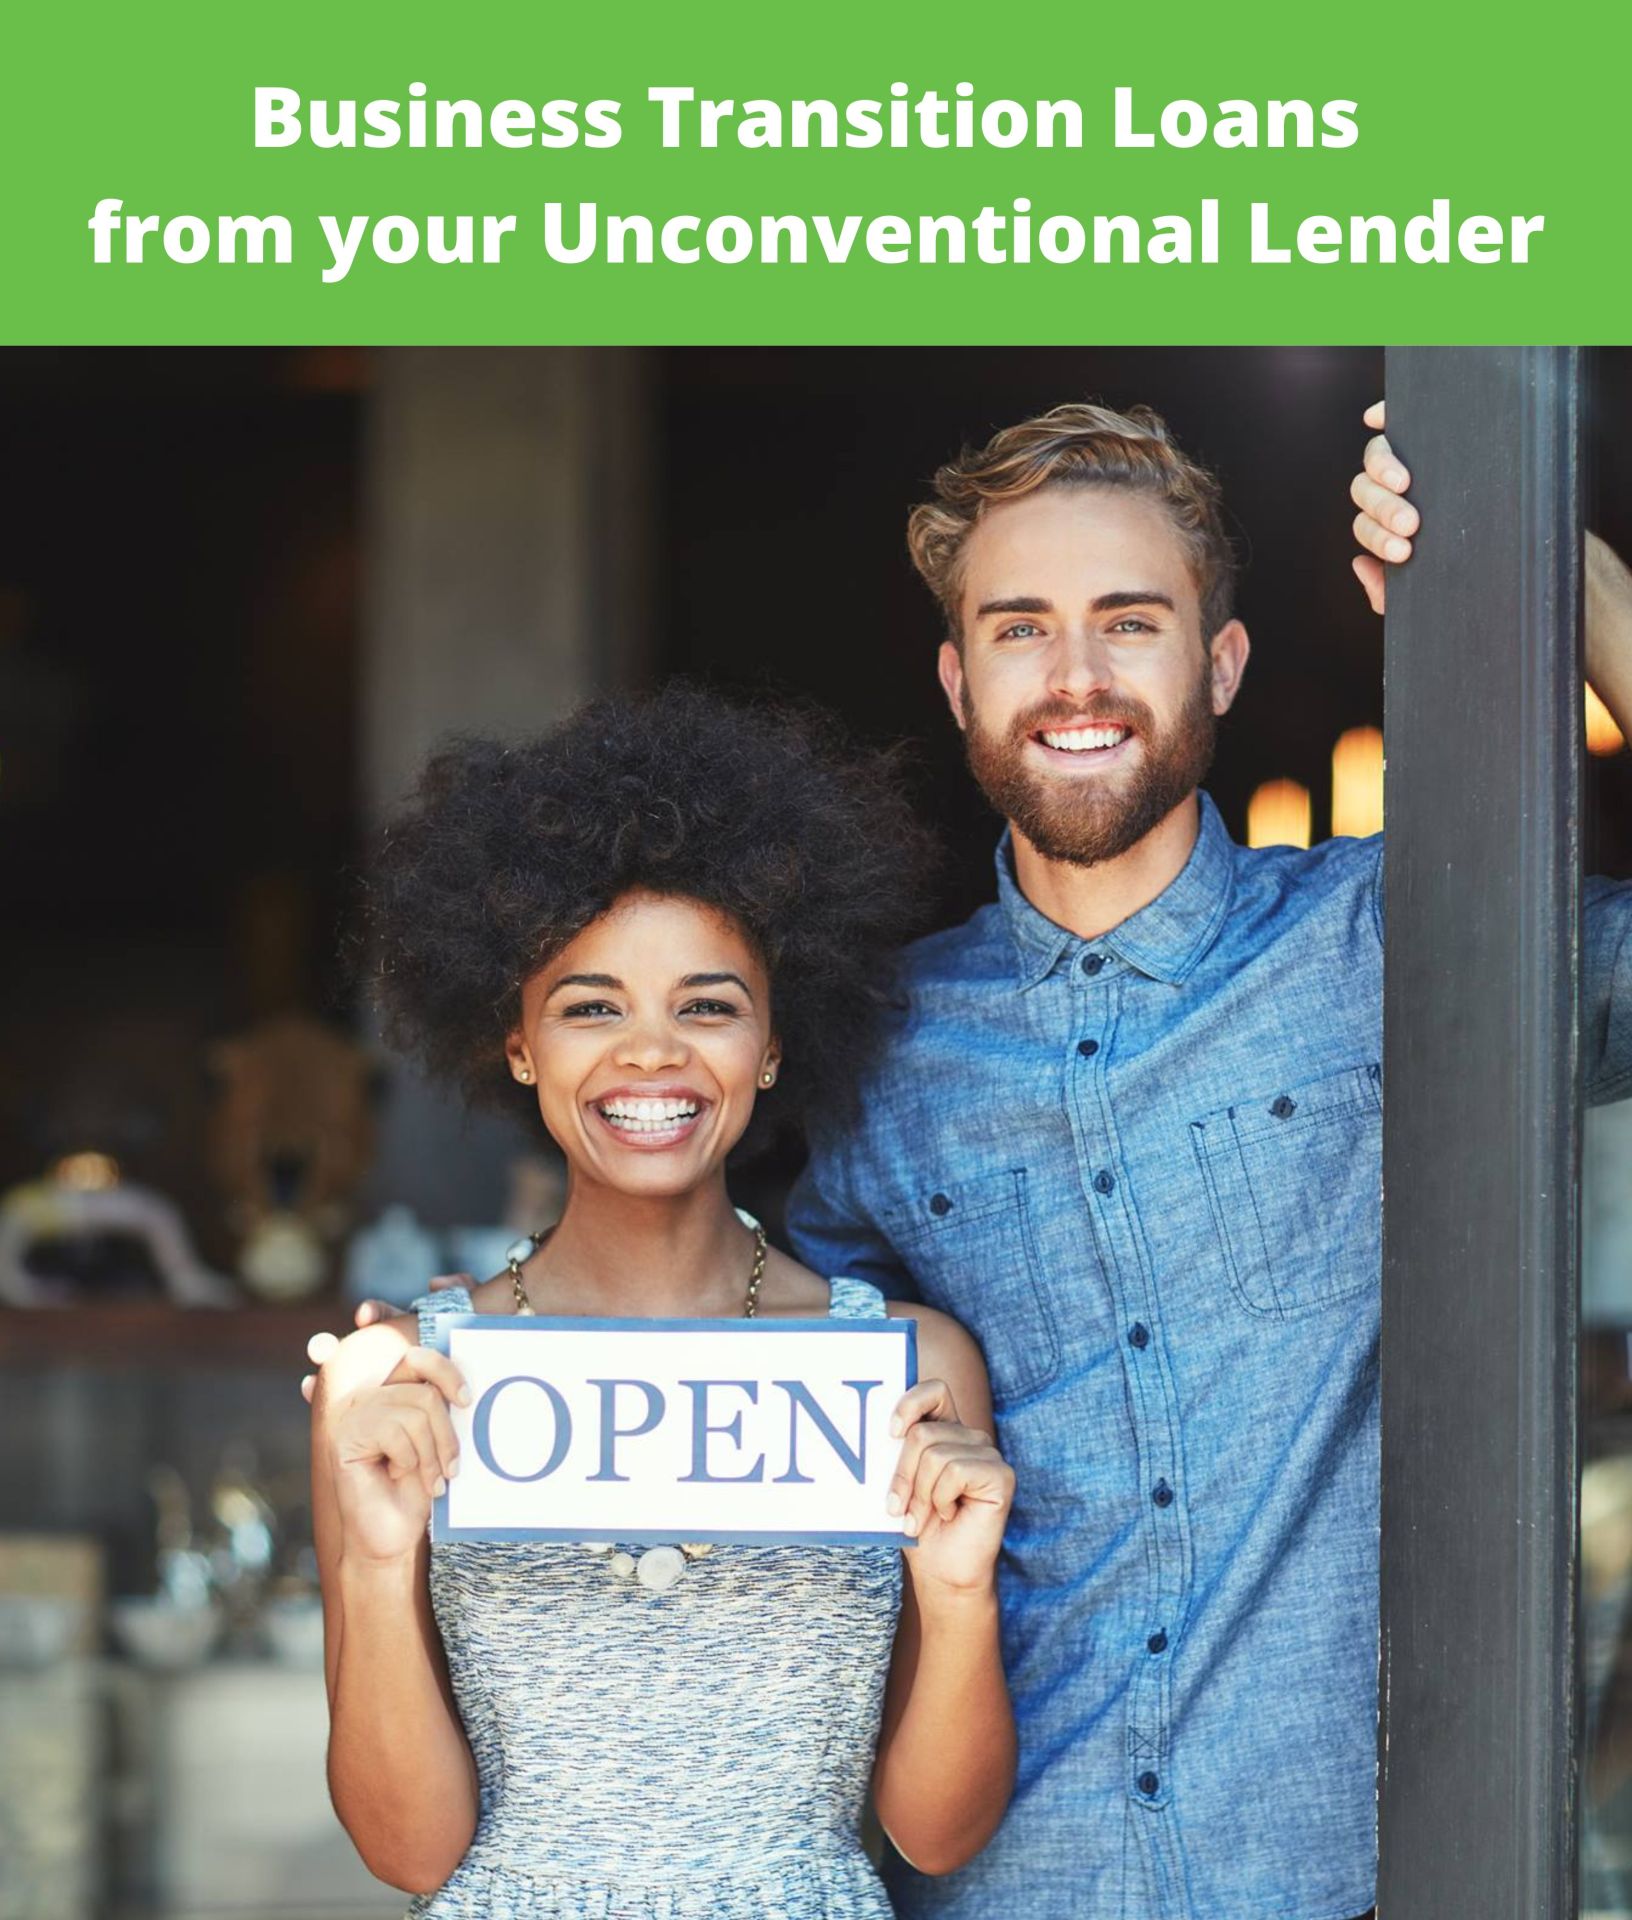 Business Transition Loans from your Unconventional Lender 3 - Targeted Lending Program